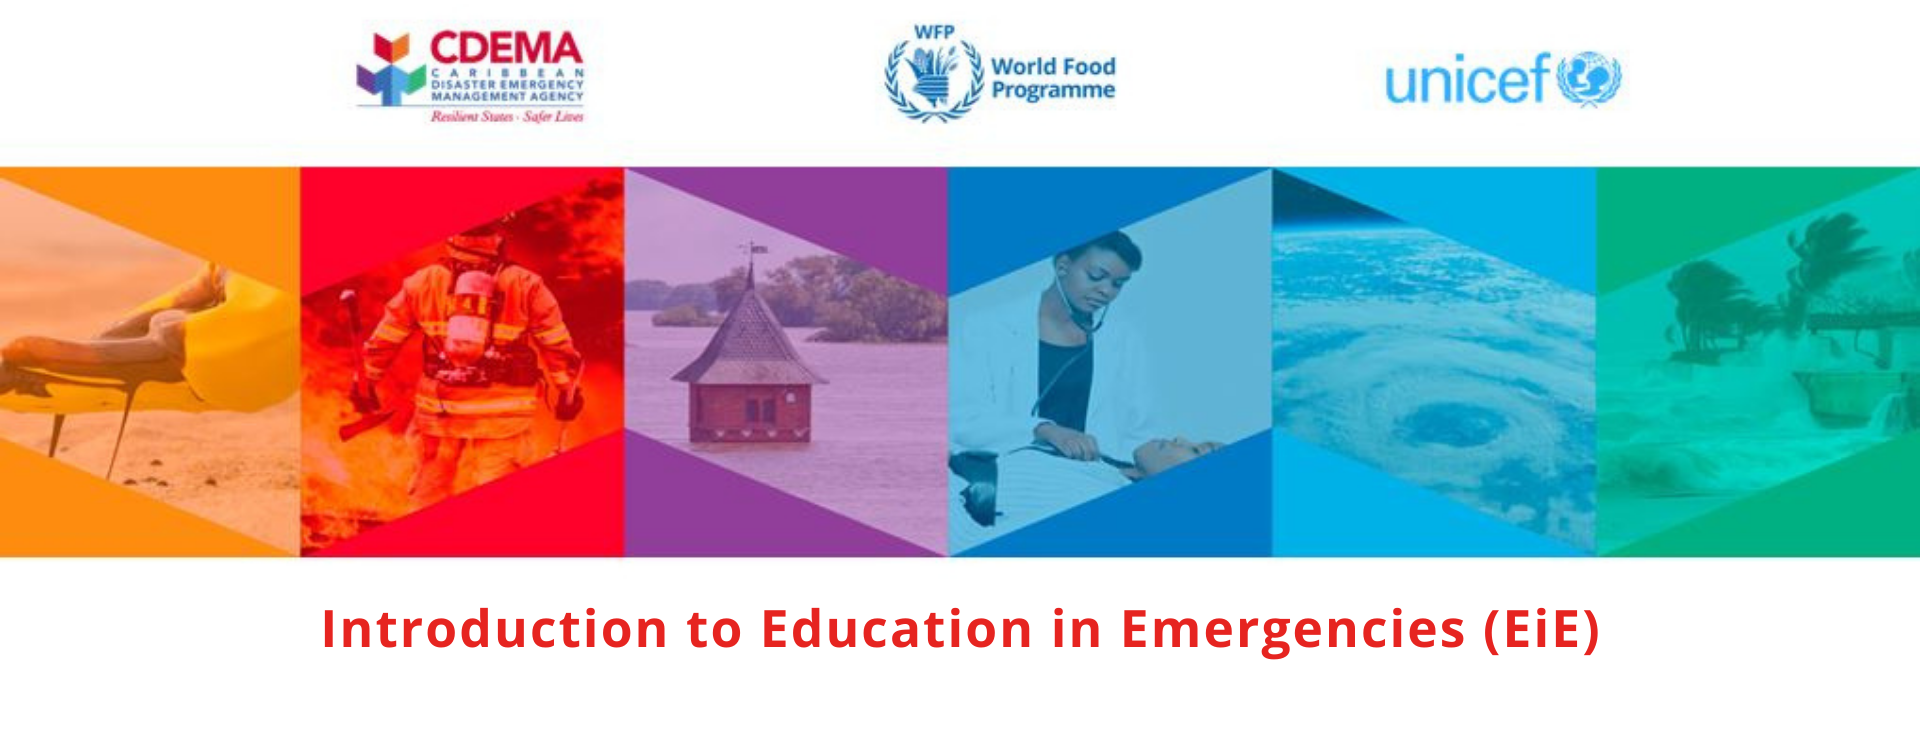 Introduction to Education in Emergencies (EiE)